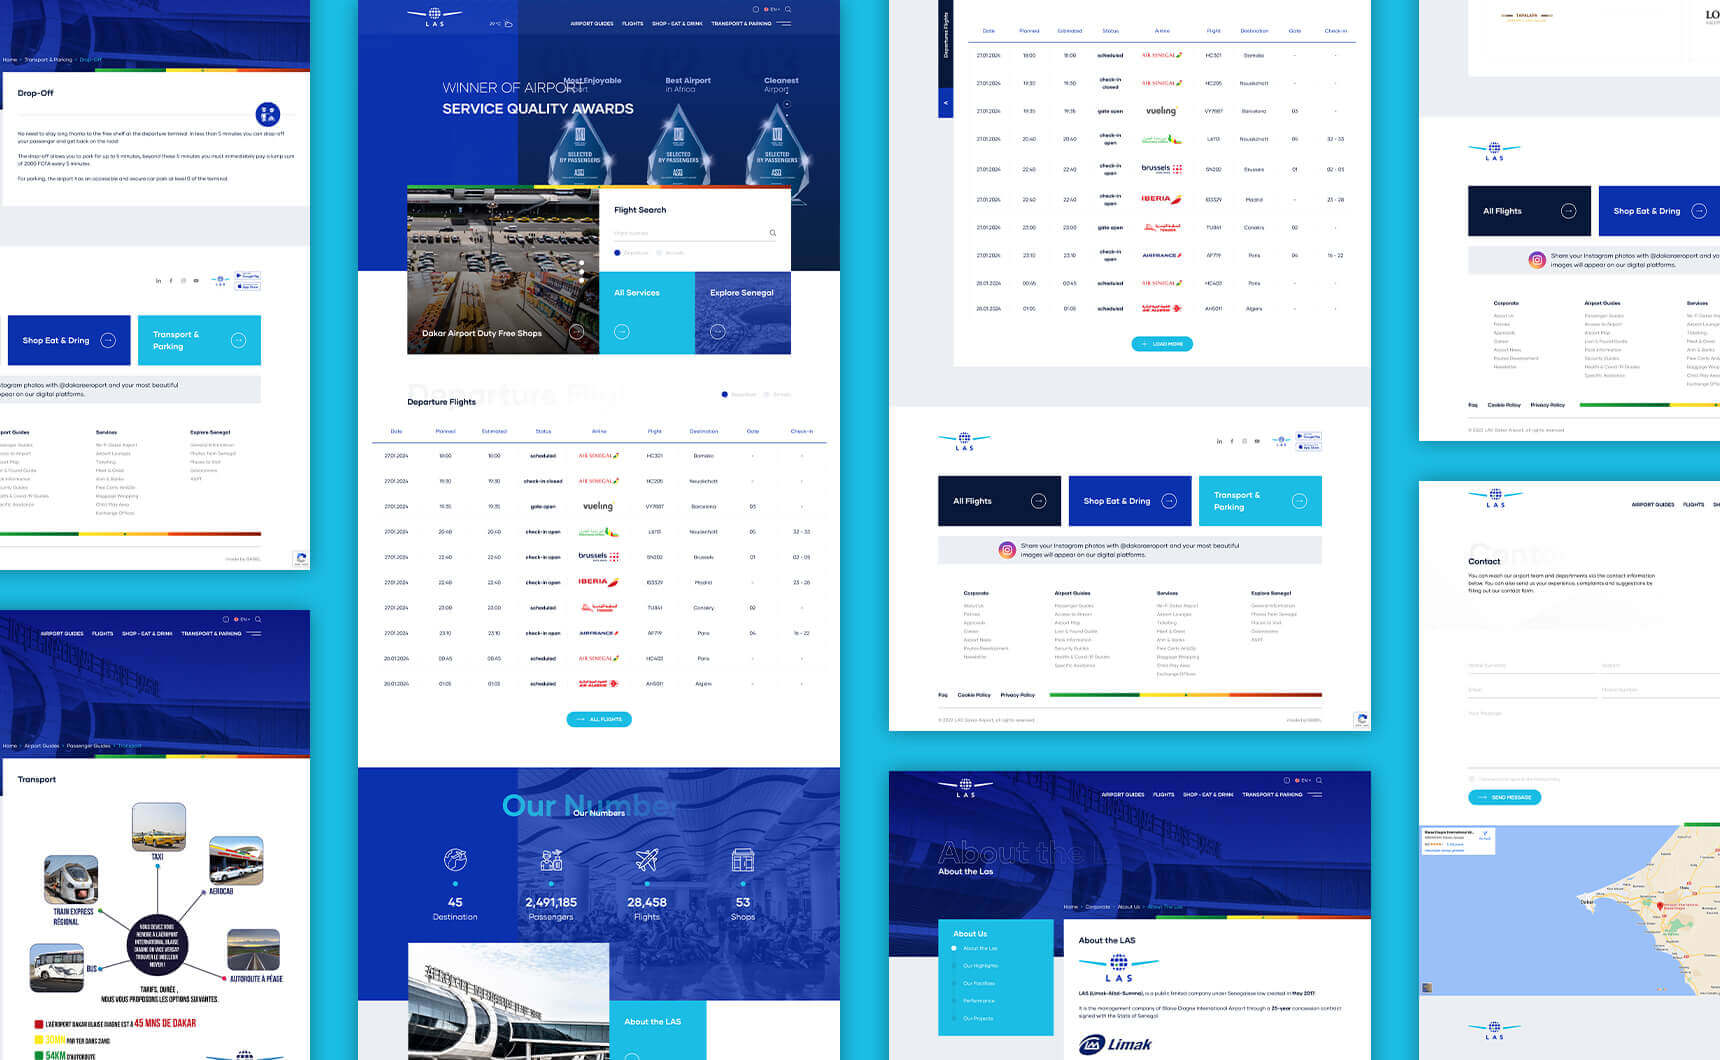 Dakar Aeroport-2 - wrinting 1-3 - web promo-5 - website-page-6 - app-mockup-7- home-page-8 - type-9 - color-10 - web-pages-11 - laptop-mockup-12 - mobil-page-13 - tablet-screen-14 - phone-tablet mockup-15 - web-pages-16 - imac-mockup-17 - web-pages-1